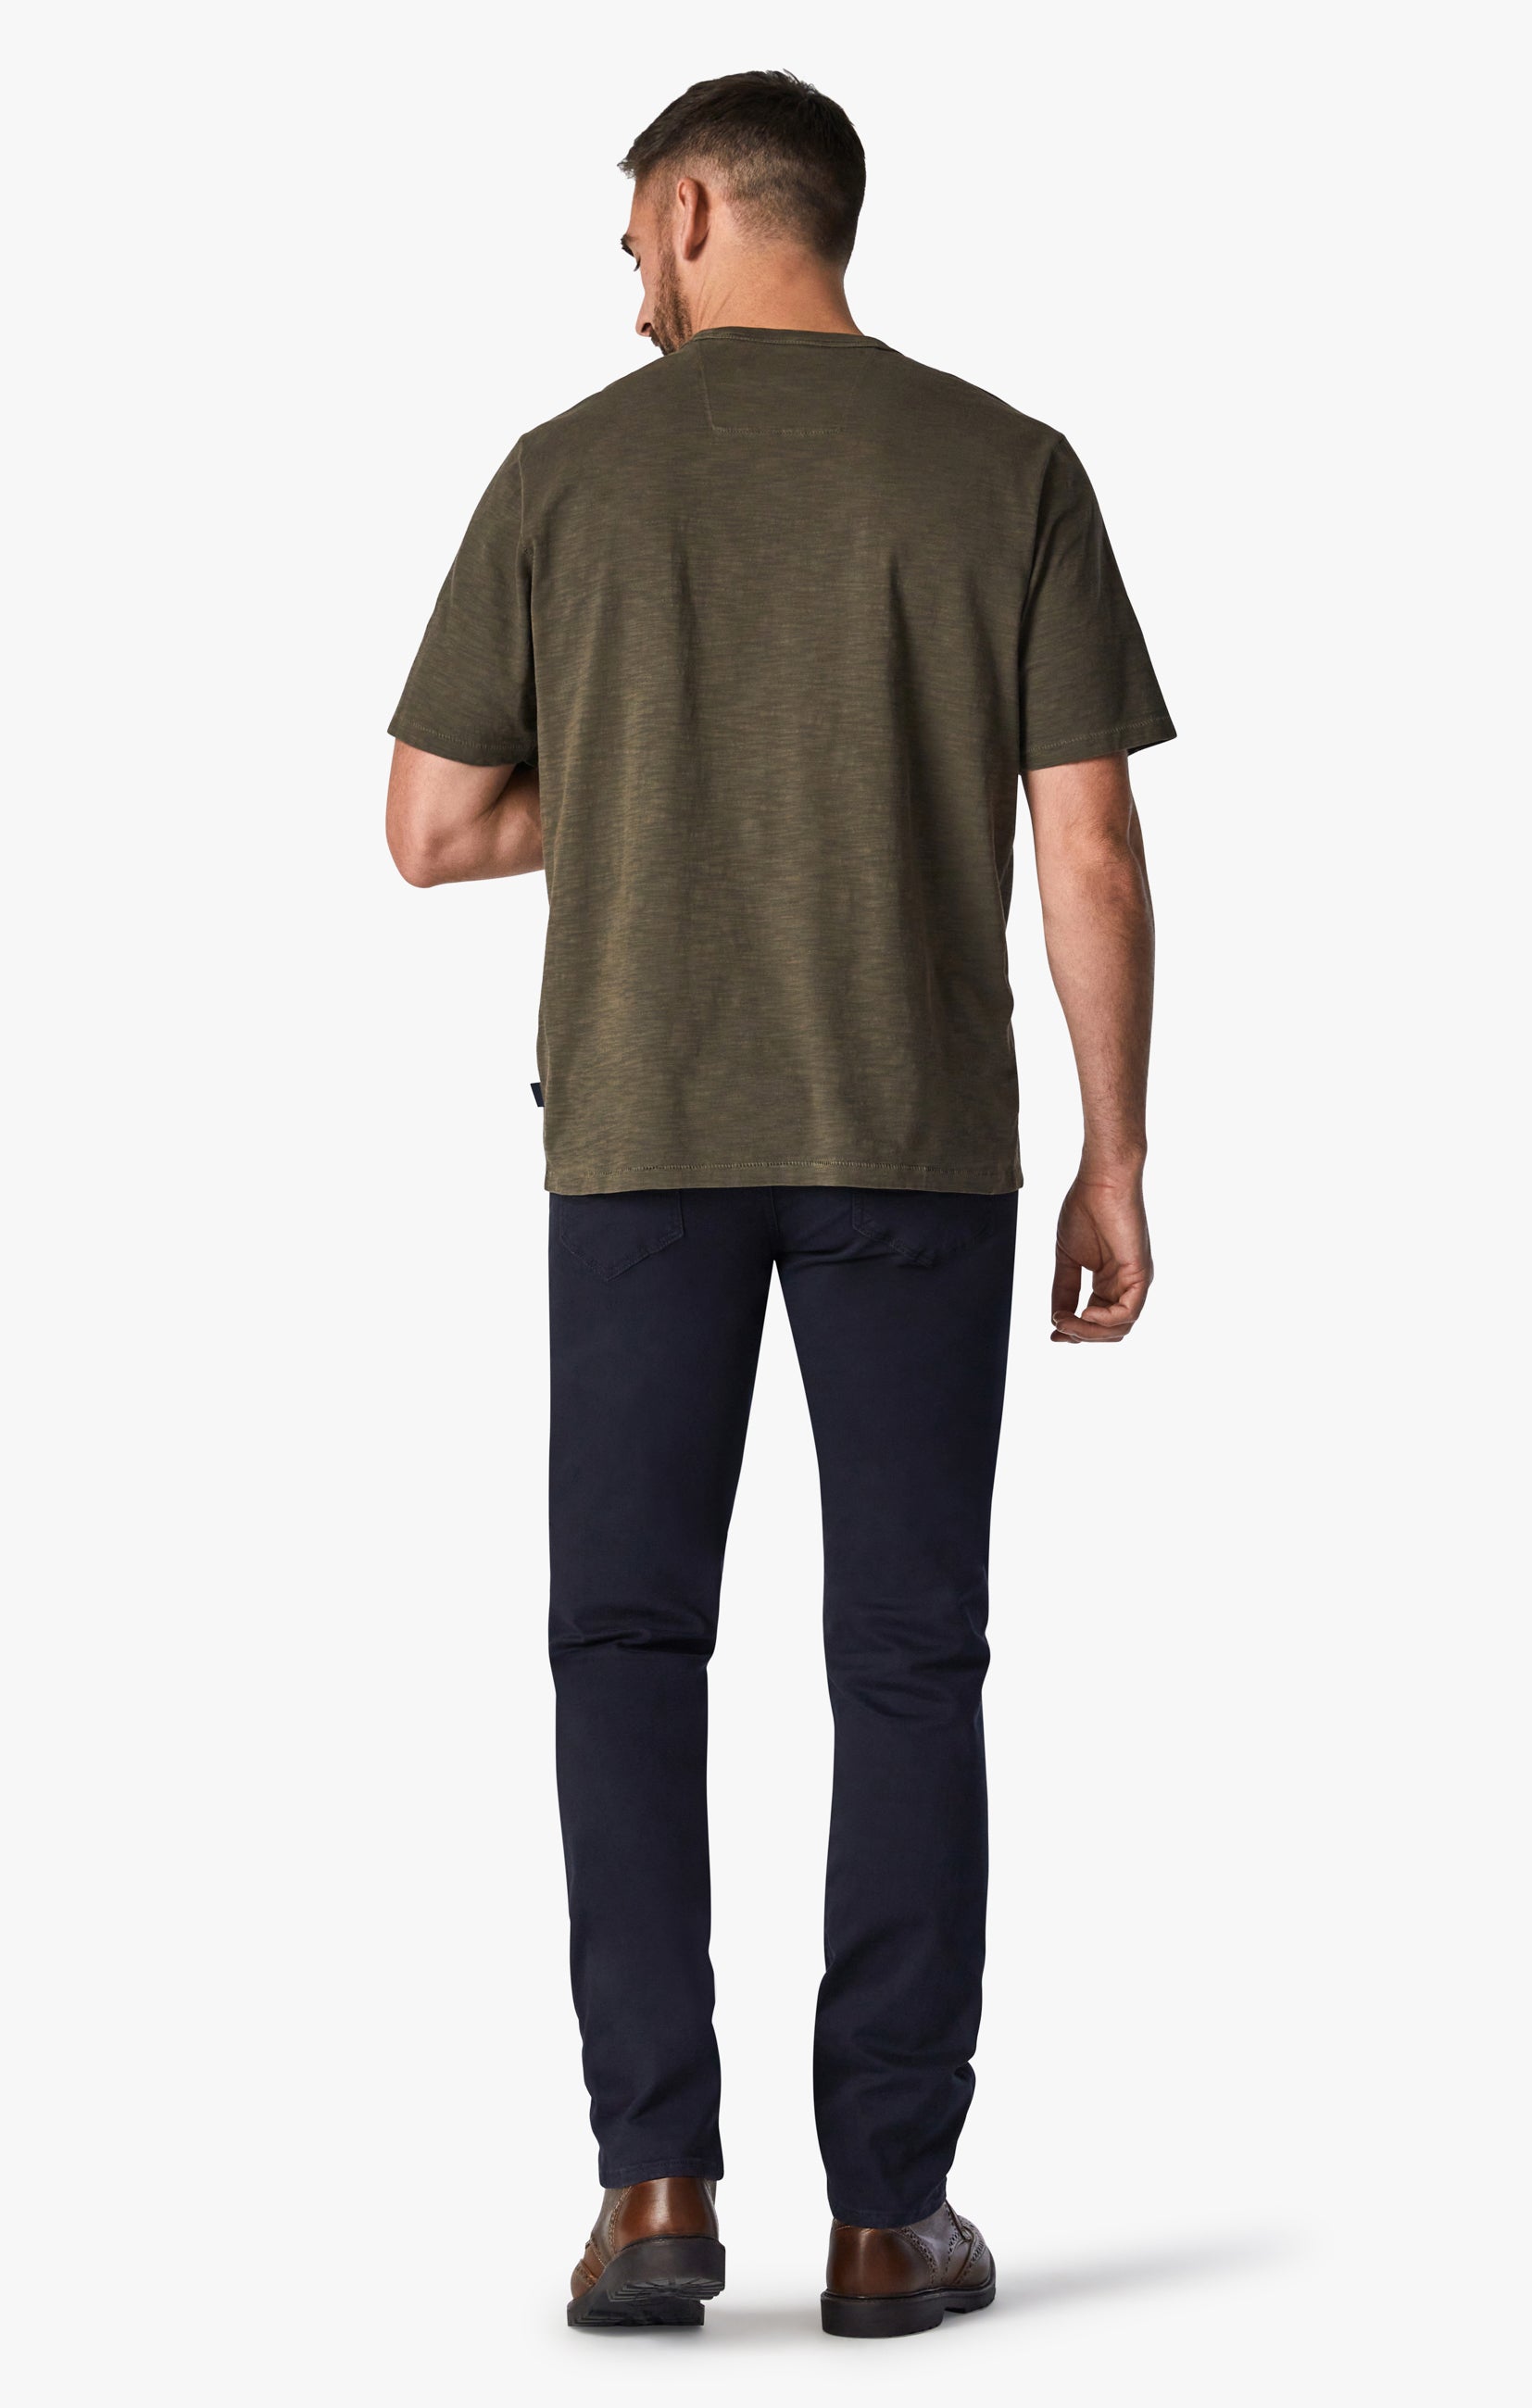 Courage Straight Leg Pants in Navy Twill Image 4